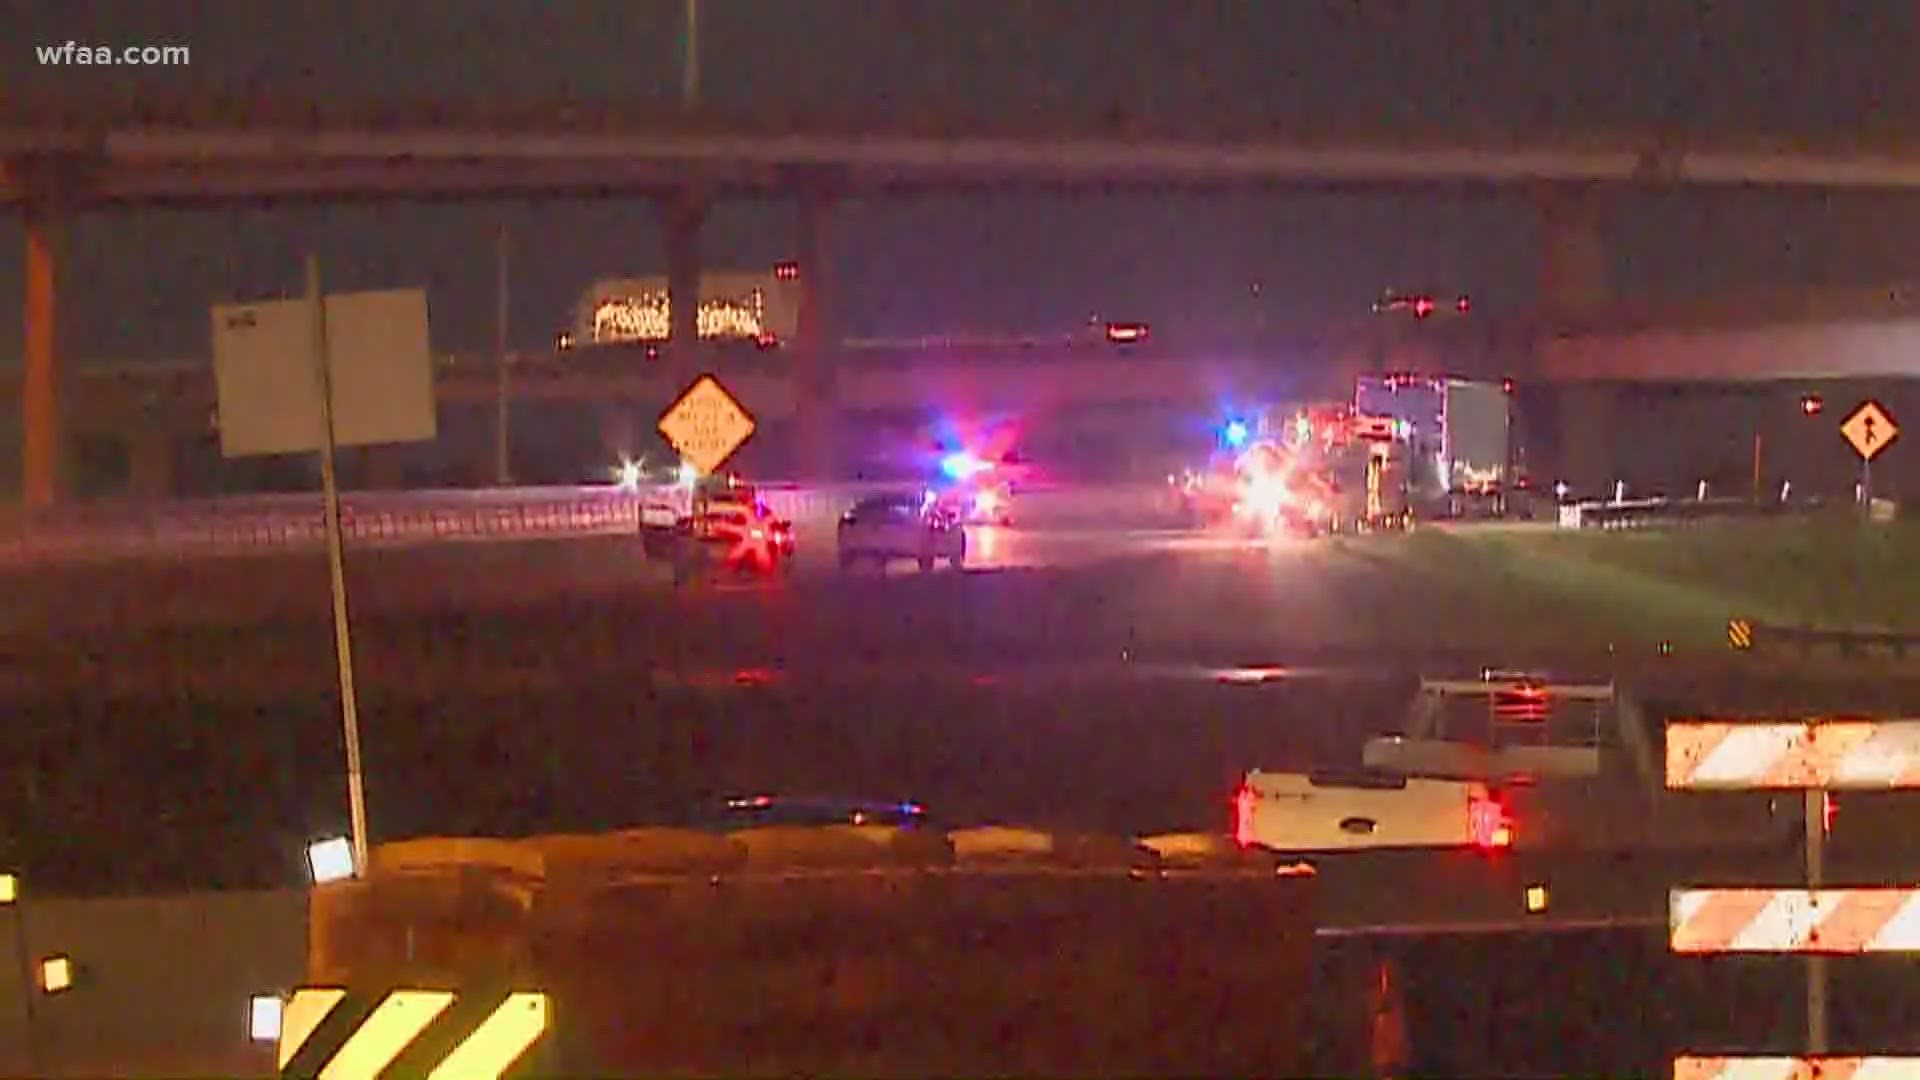 A crash that happened around 5:30 a.m. Tuesday at the convergence of the two highways in Mesquite was causing major delays, officials said.